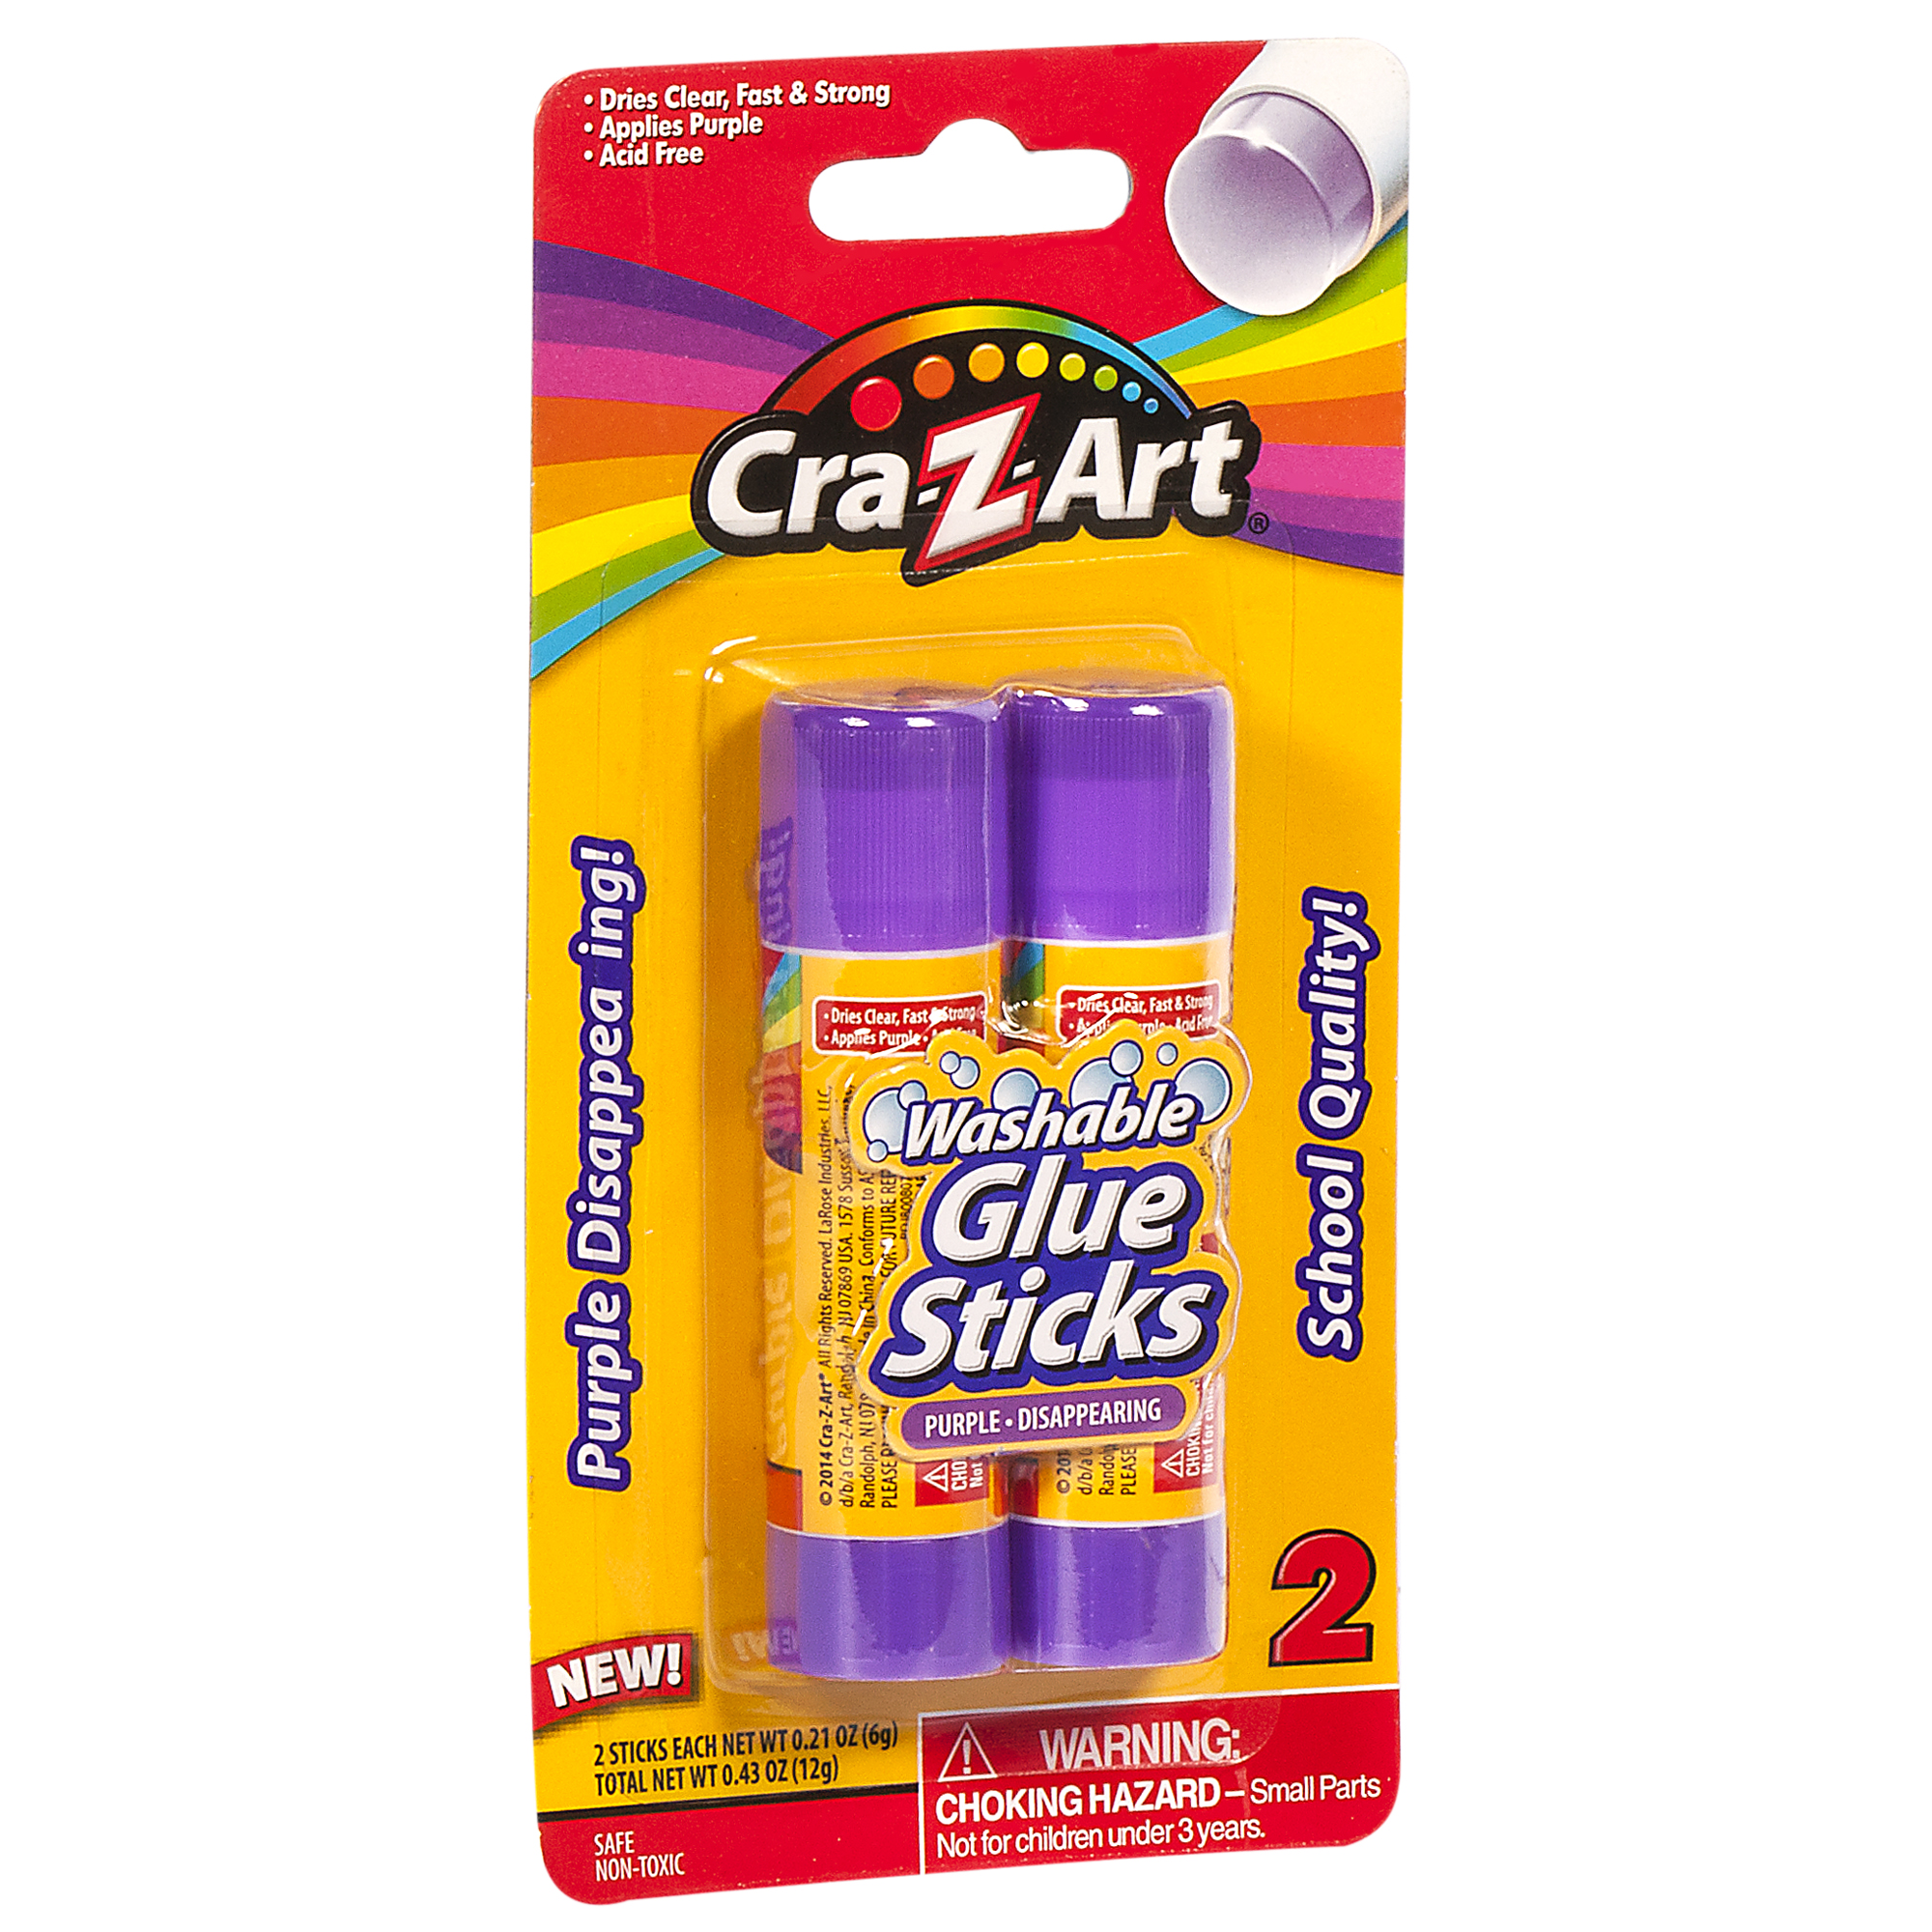 Cra-Z-Art Washable Glue Sticks, Disappearing Purple, 2 Count, 1.5oz - image 3 of 10